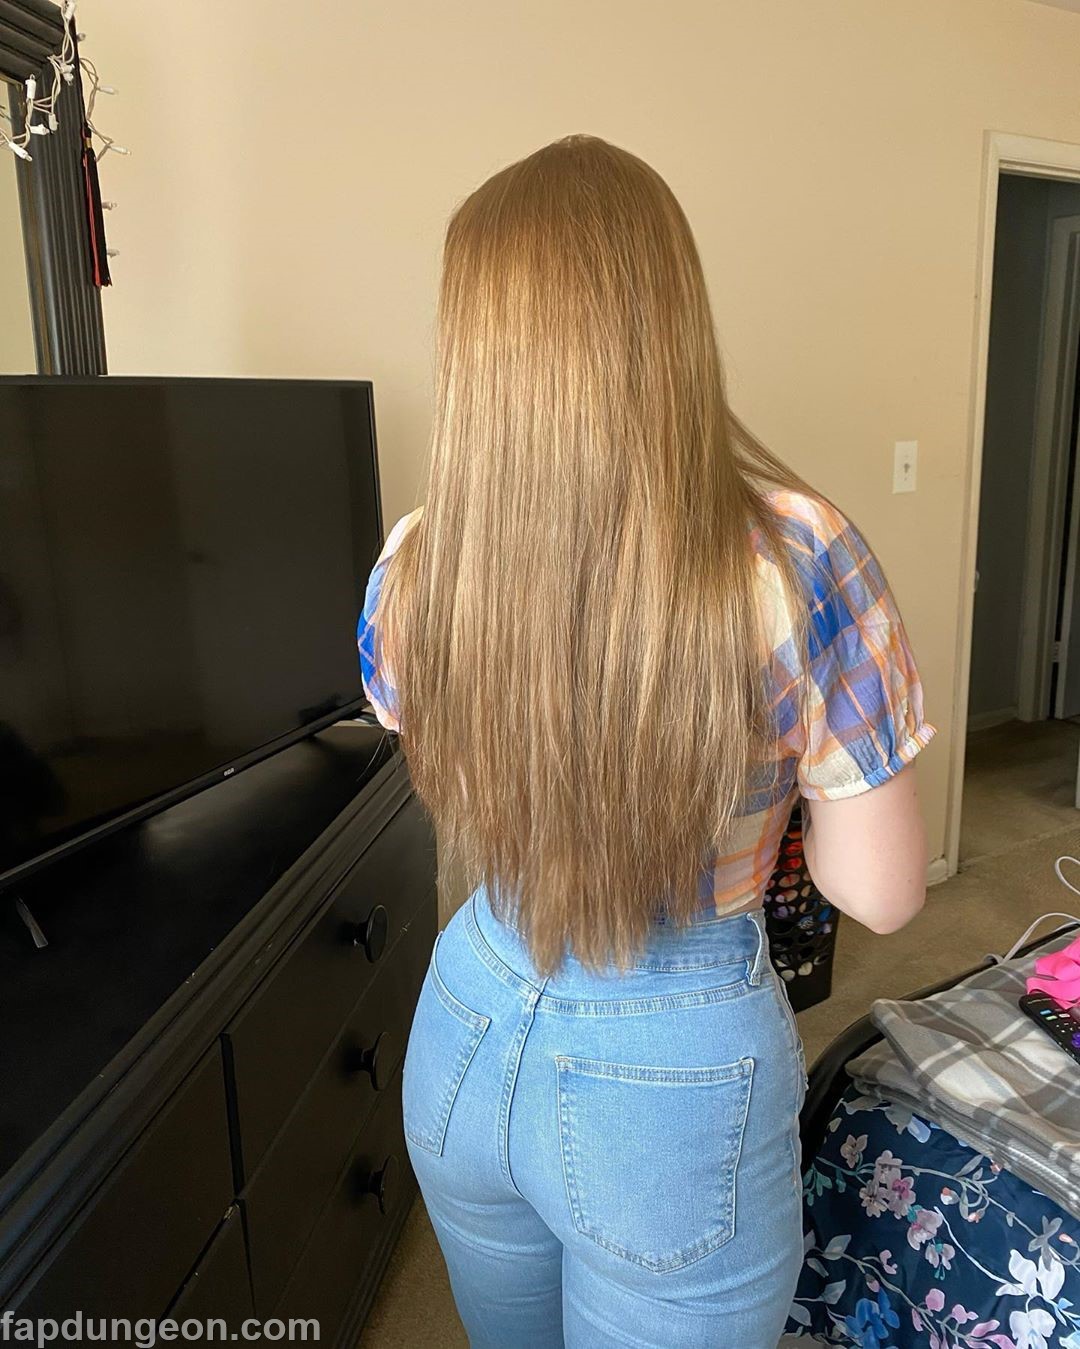 Therealtayyyy Busty Redhead Teen Page 2 Of 3 Fapdungeon